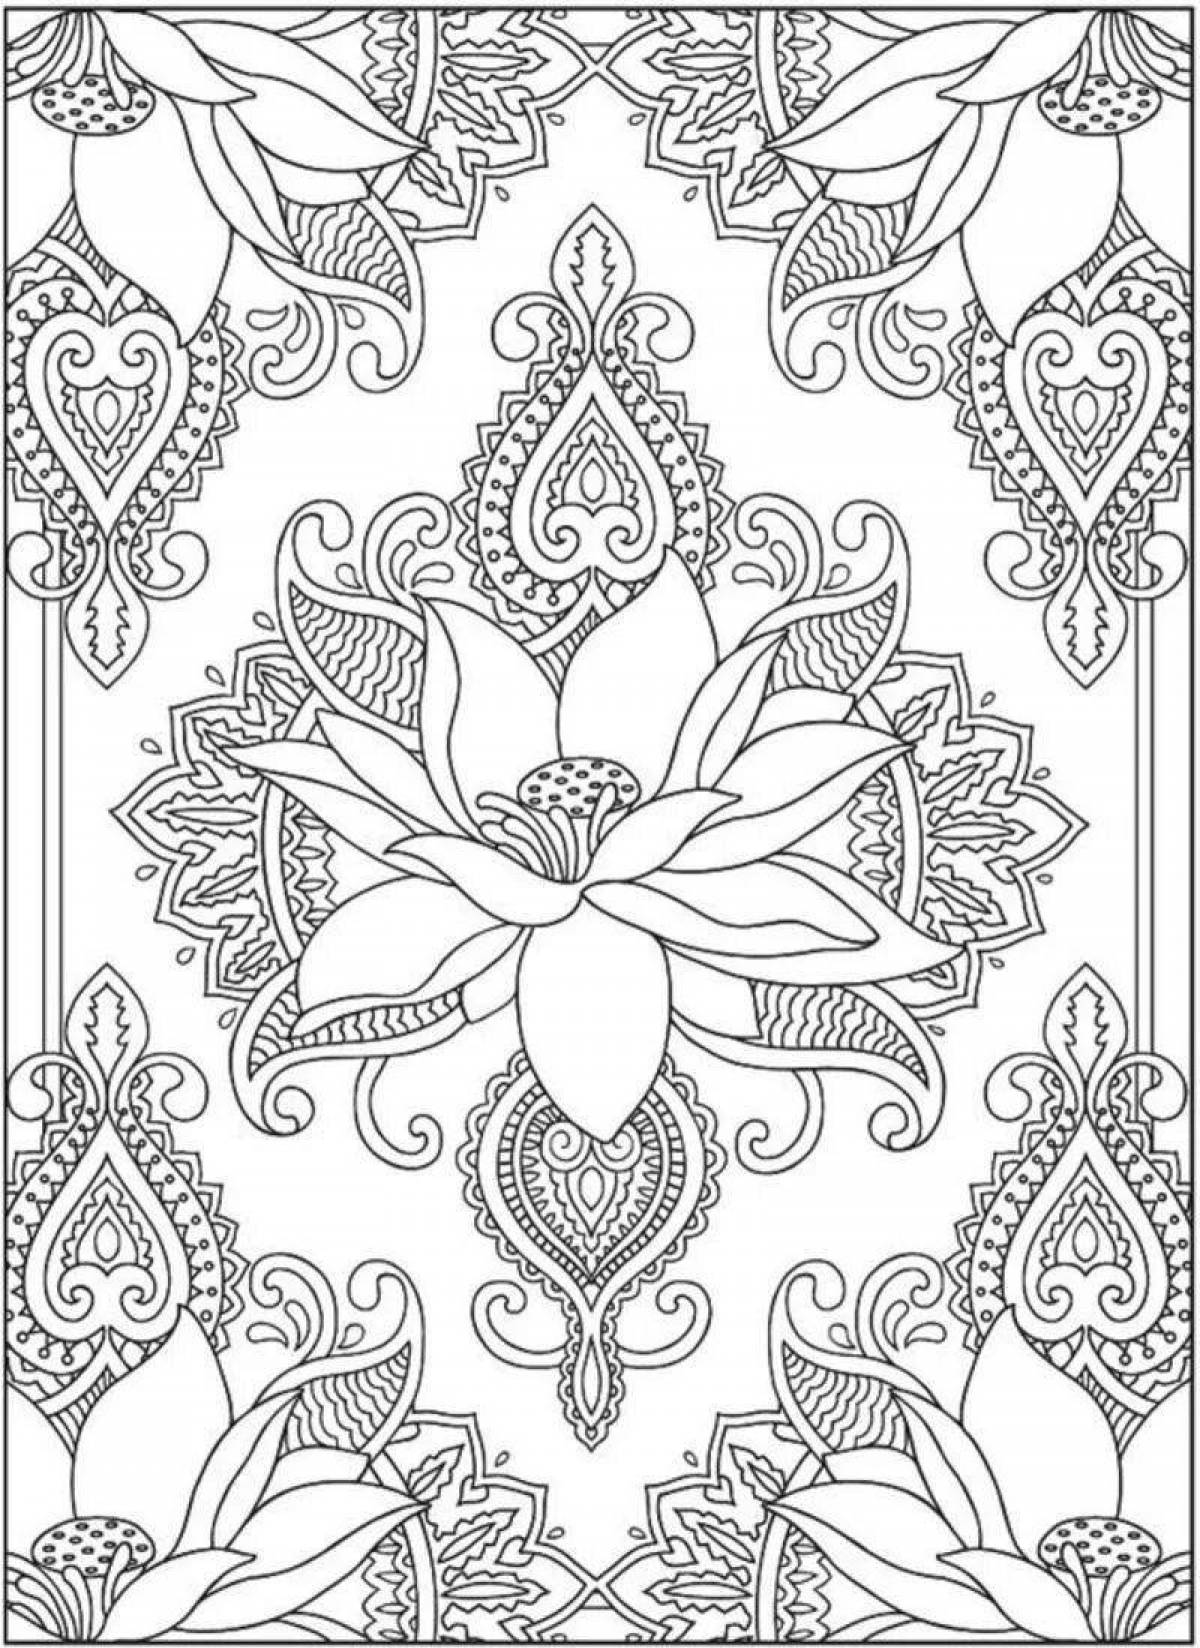 Abstract pattern coloring book